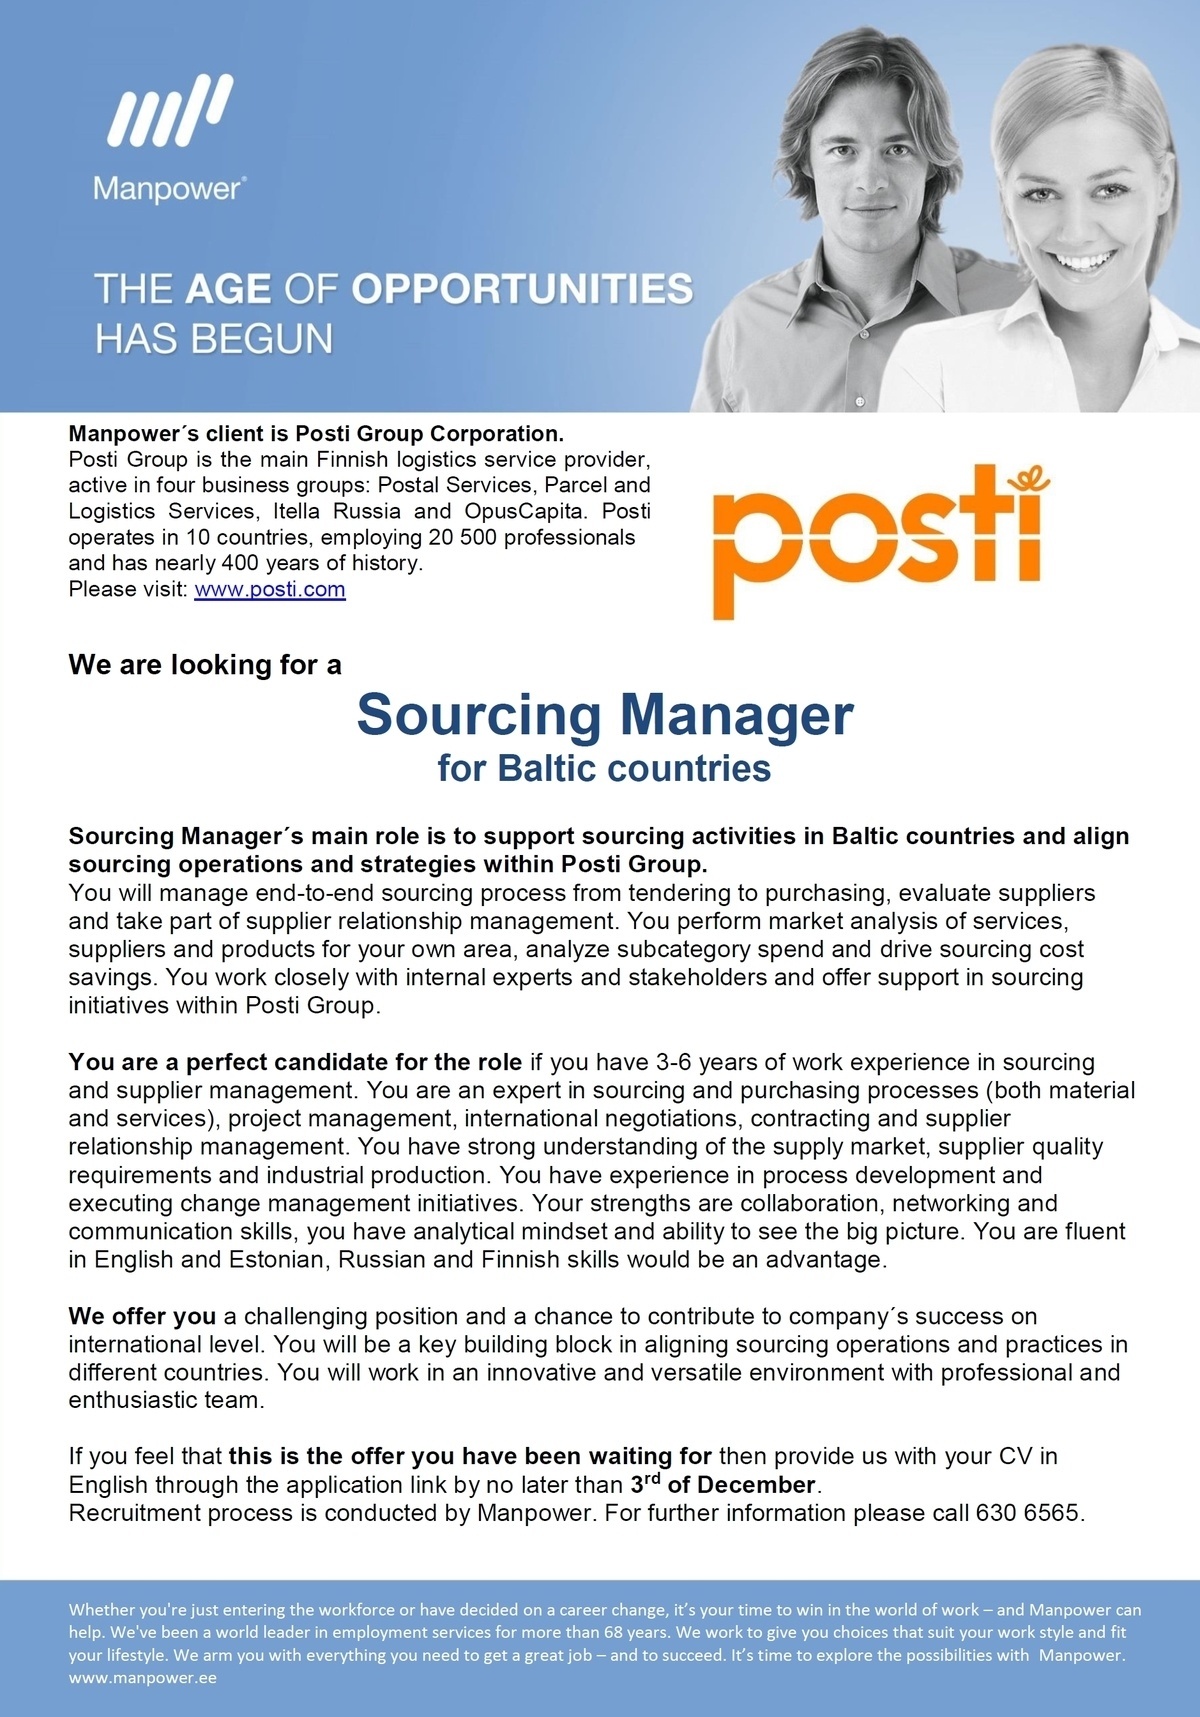 Manpower OÜ SOURCING MANAGER